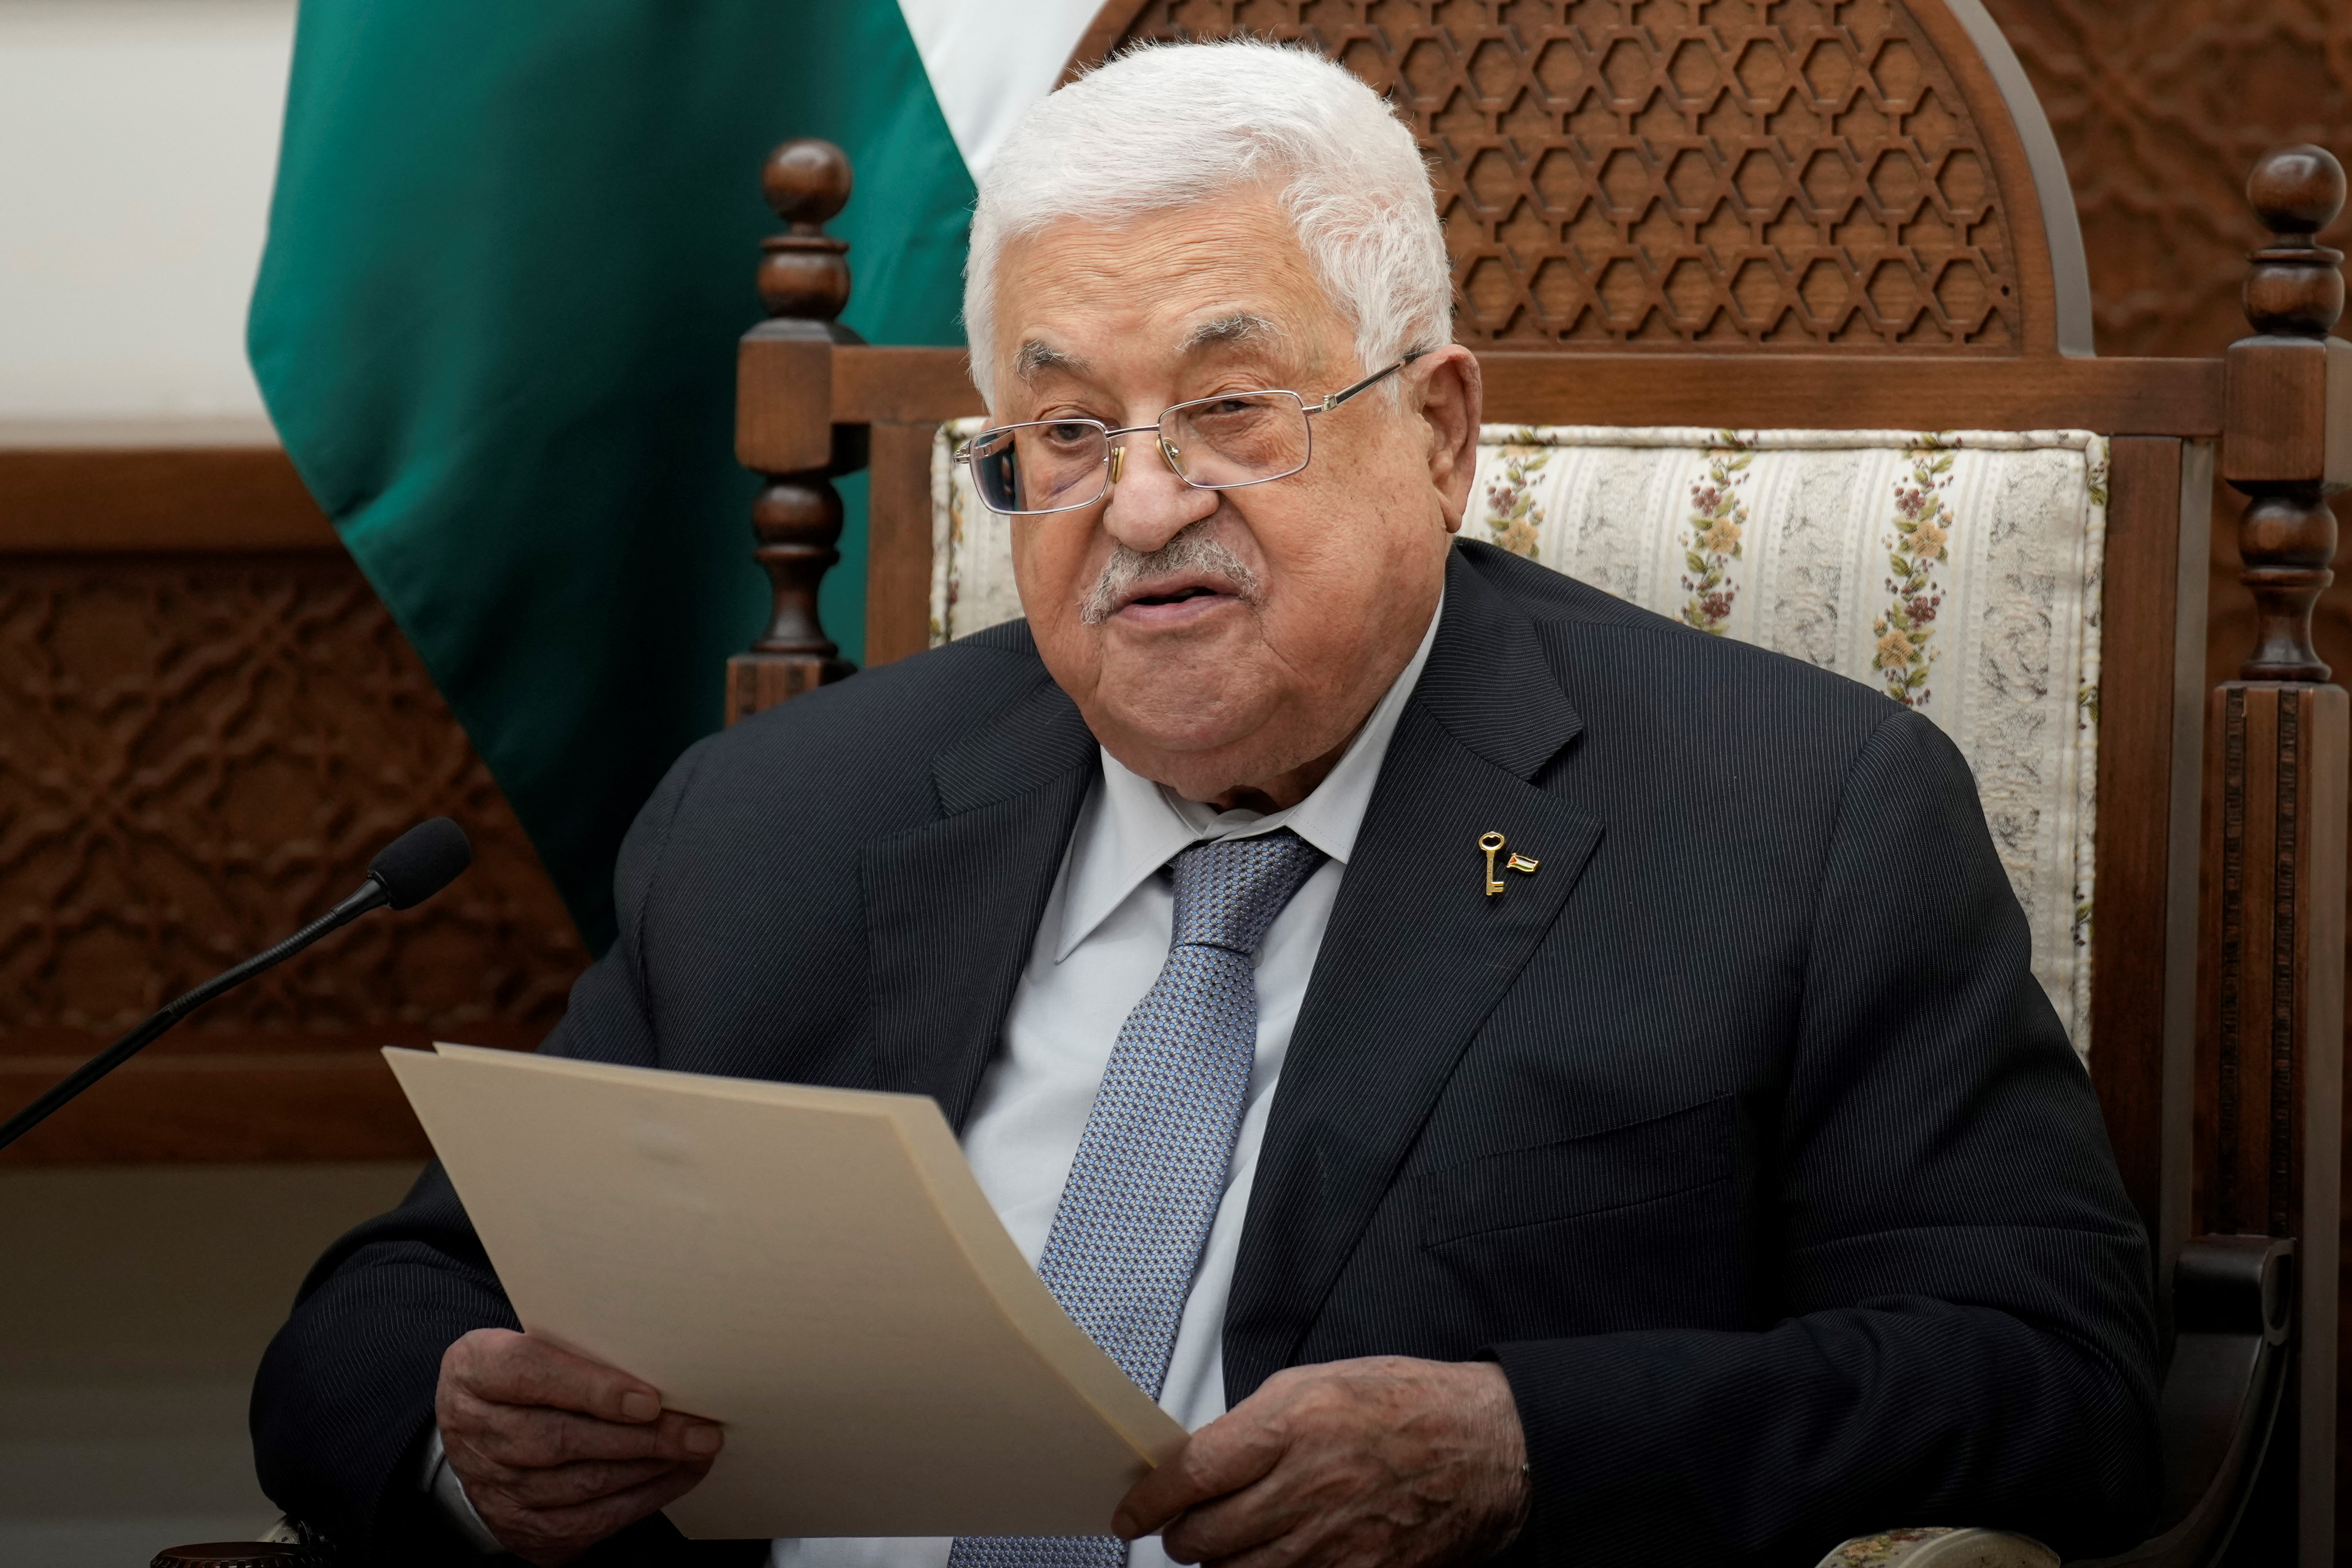 Palestinian Authority President Mahmoud Abbas speaks during a meeting in Ramallah, West Bank, on October 24.